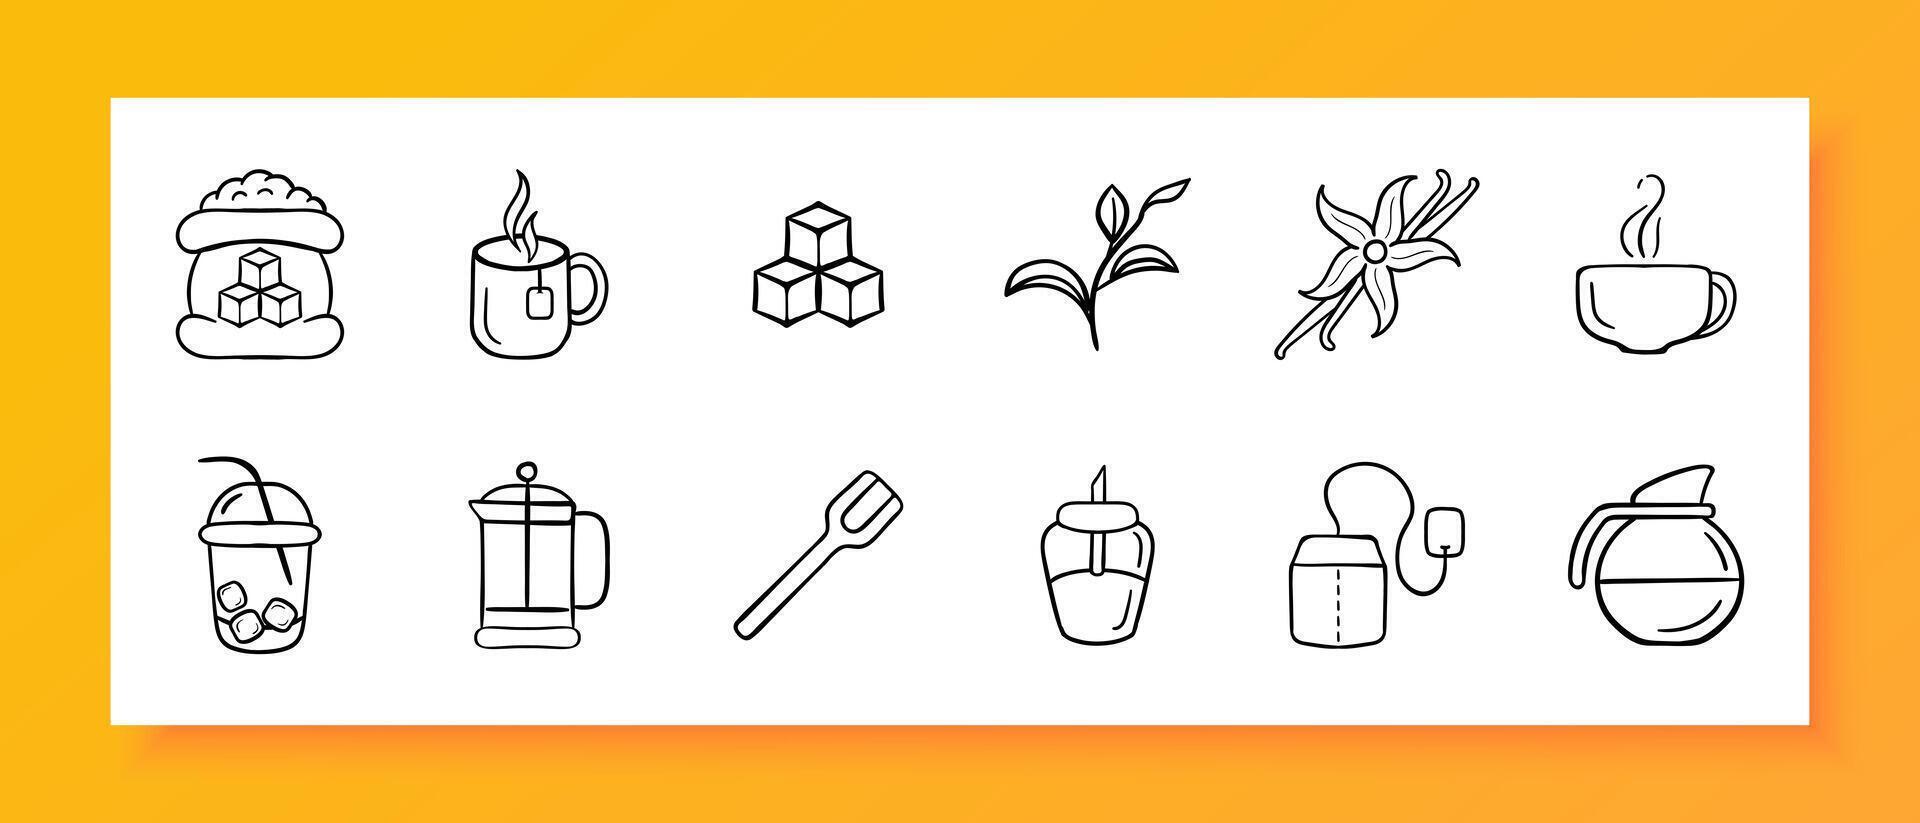 Sugar icon set. Sand, tea, glass, bag, bag, cube, refined sugar. Black icon on a white background. Vector line icon for business and advertising